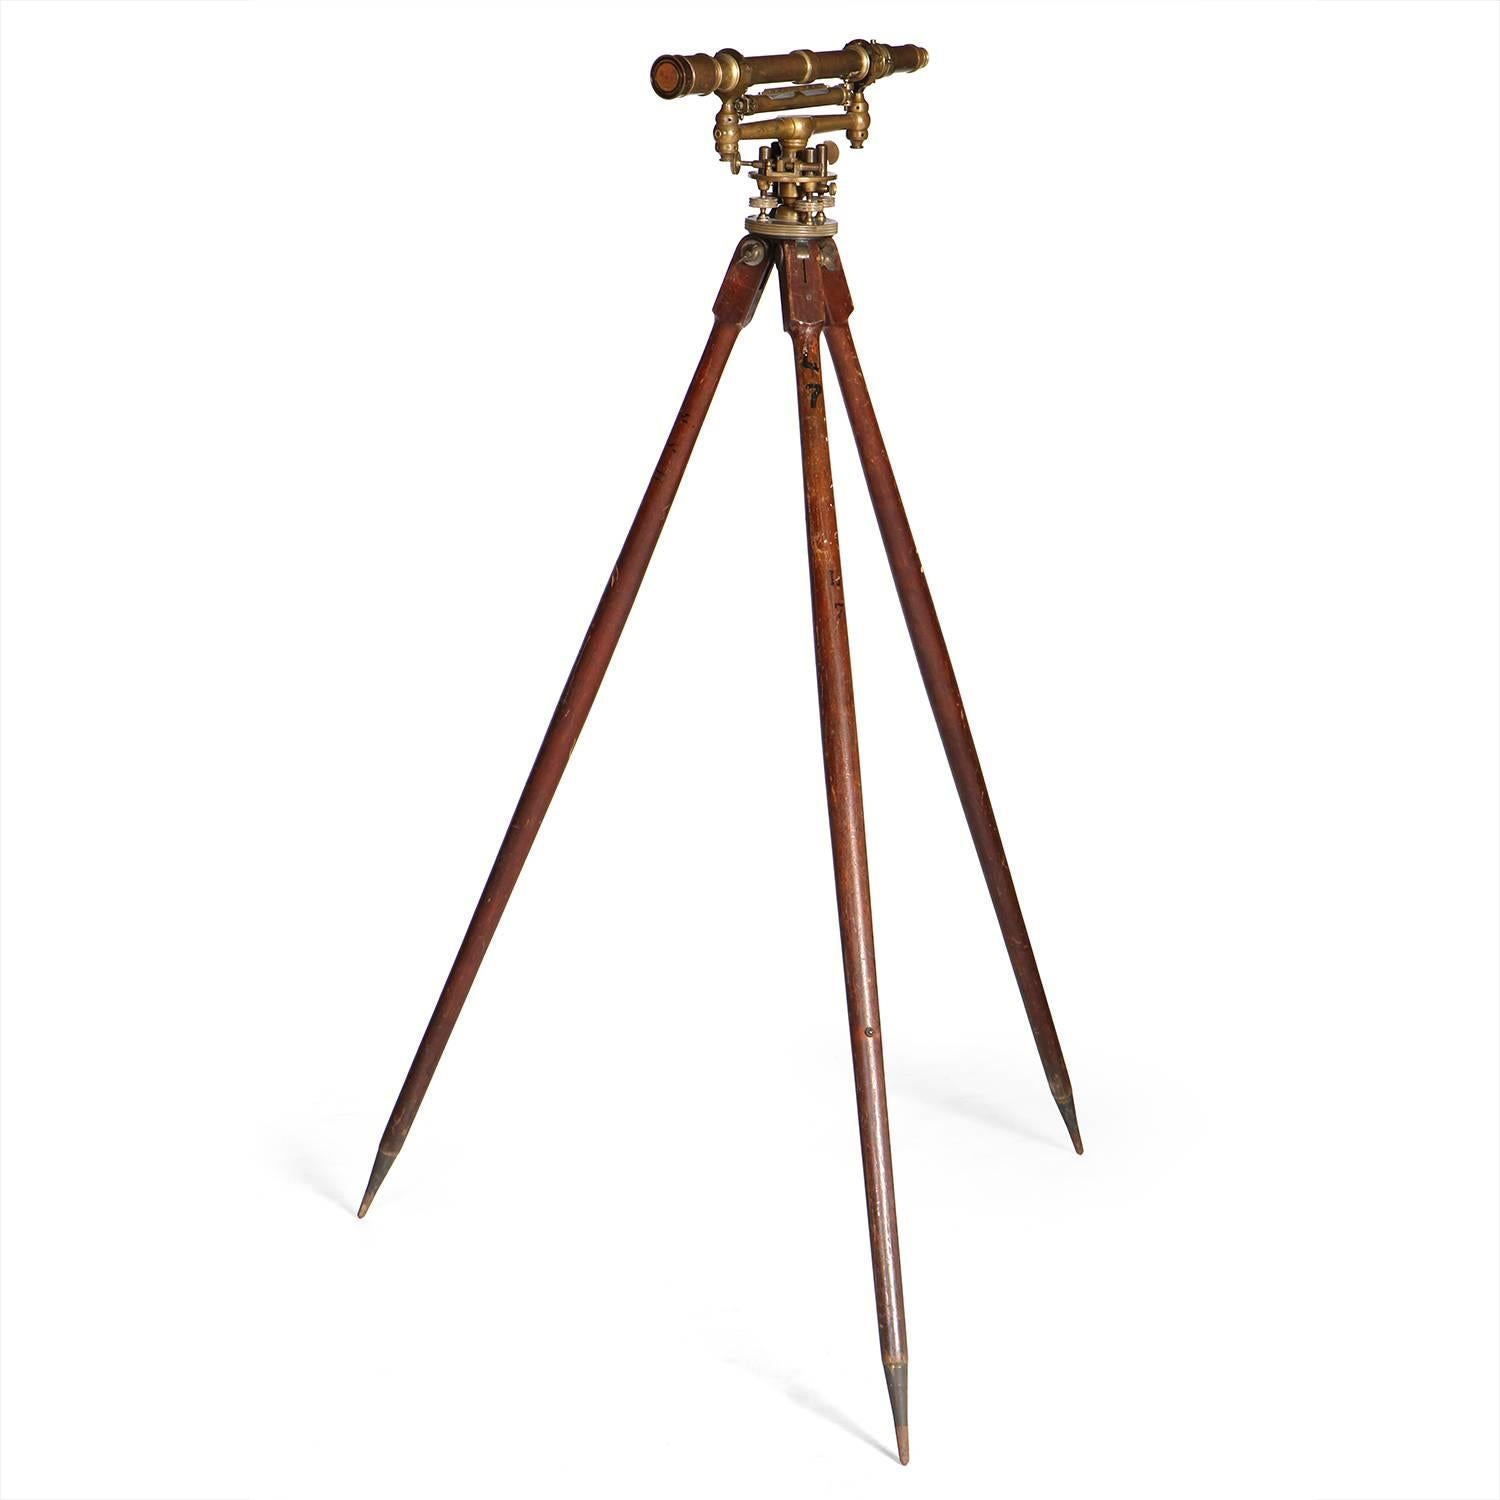 An impeccably machined surveyor's transit made of warmly patinated brass and mounted on its original walnut tripod stand.